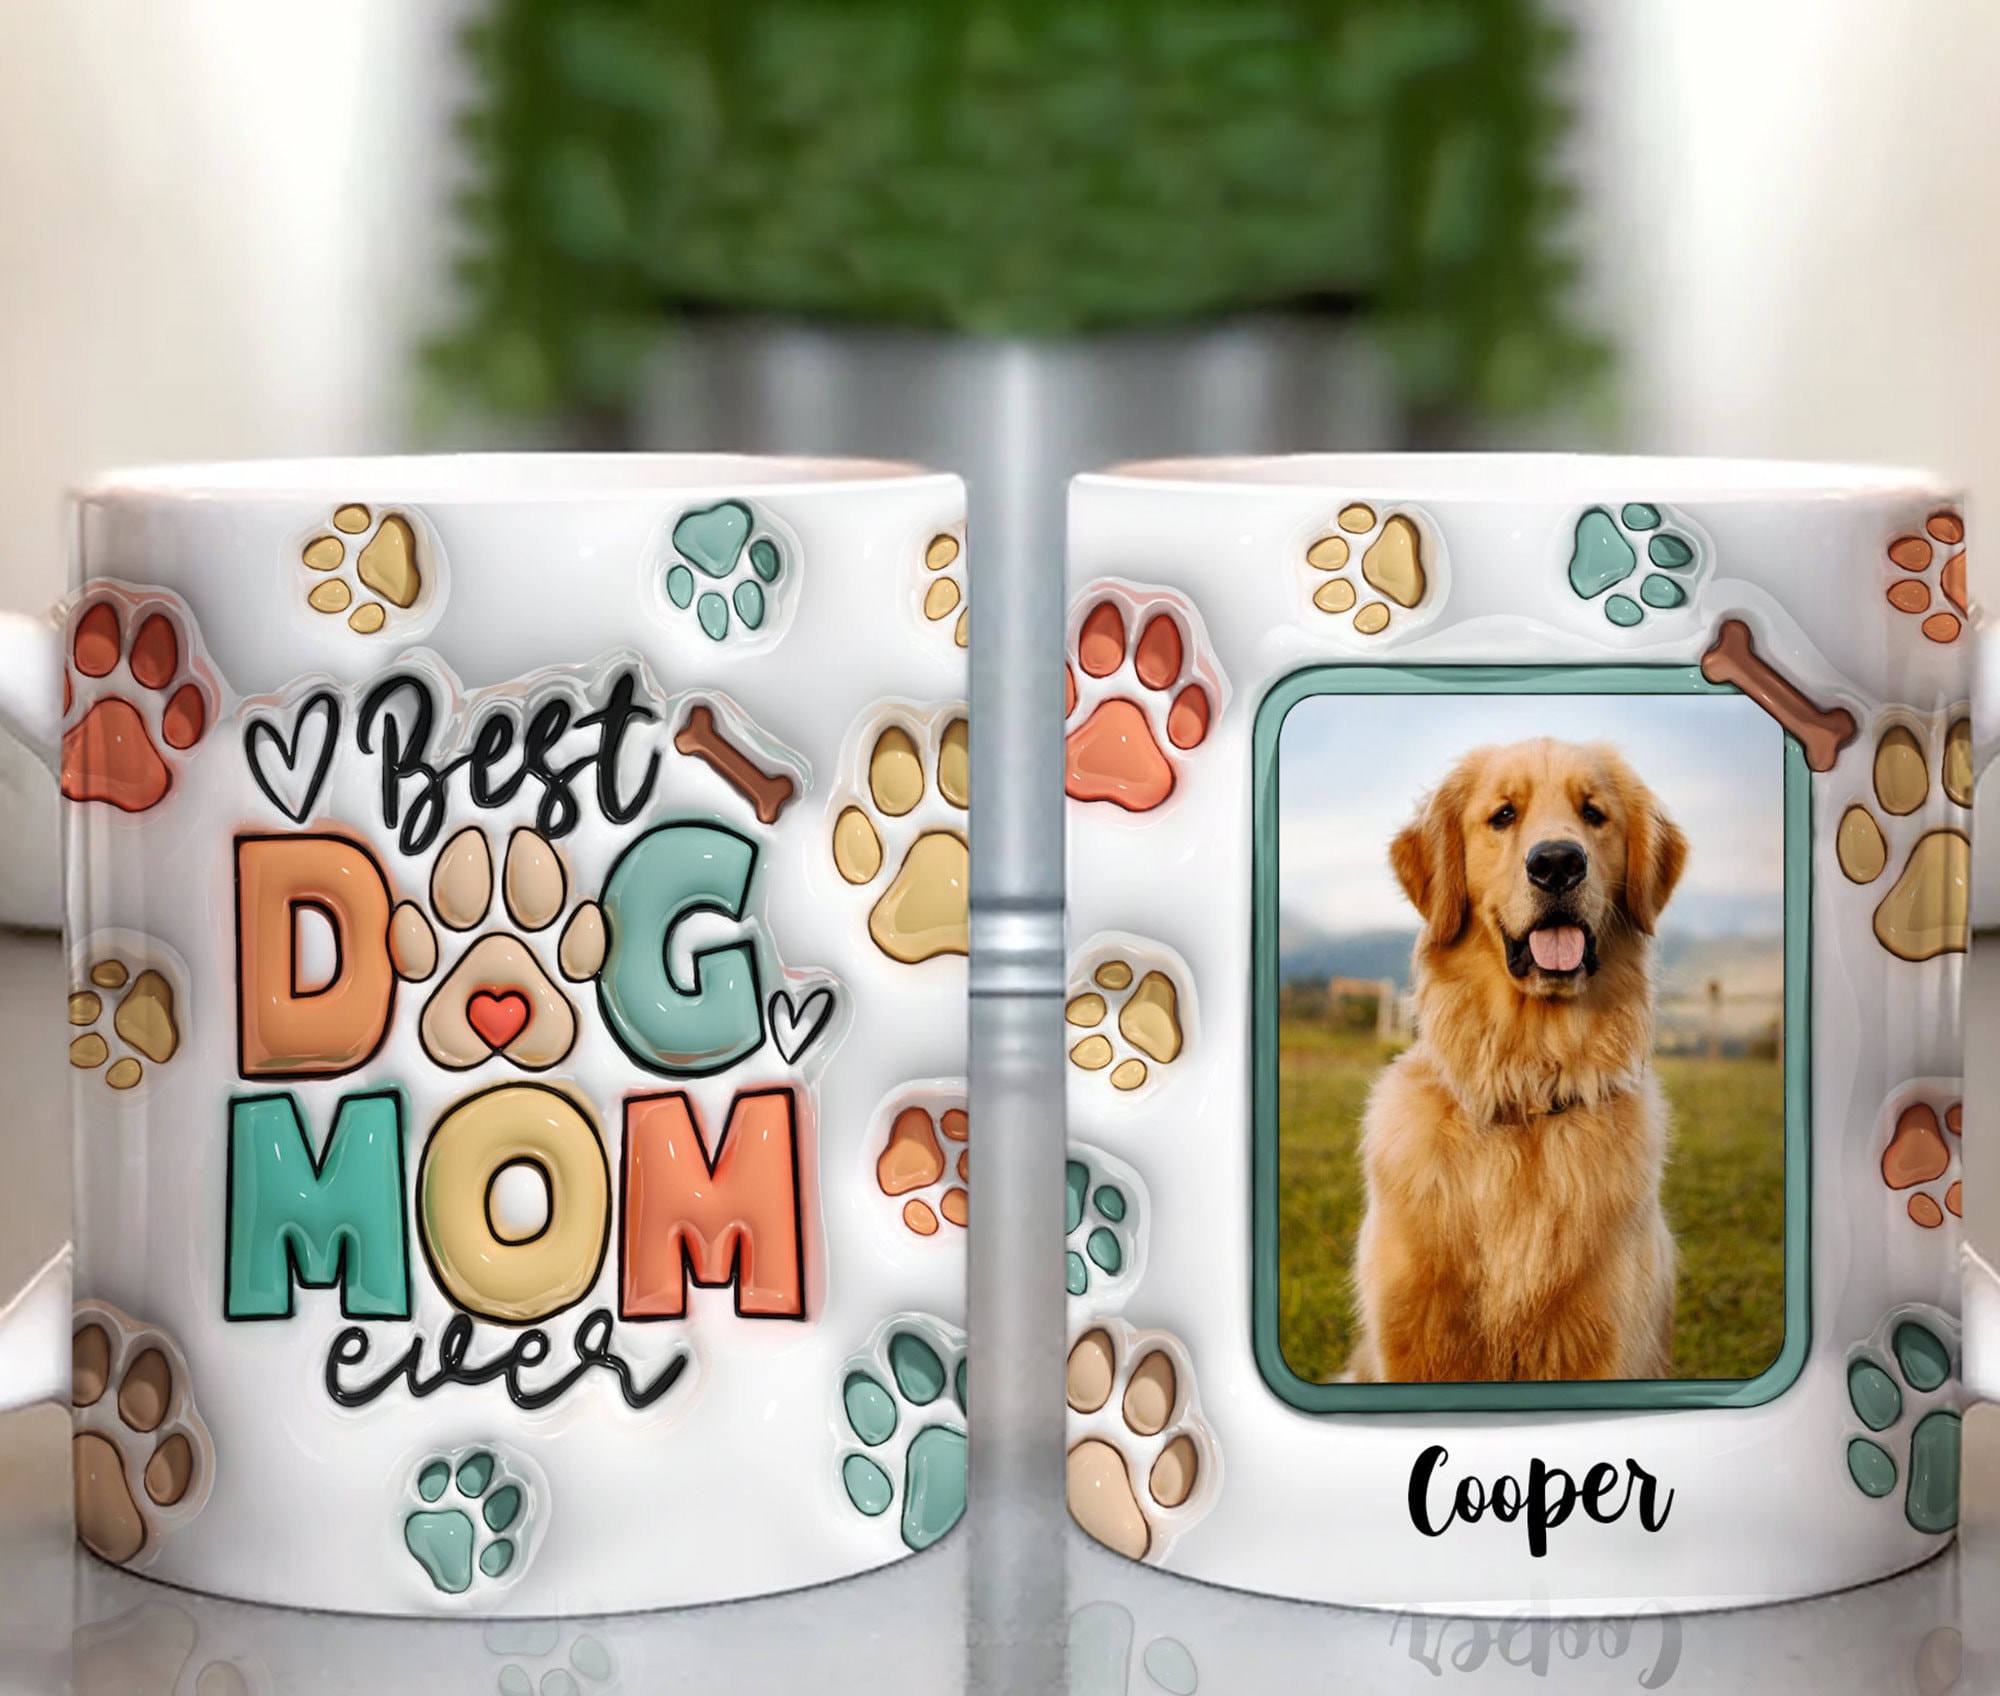 Cpskup World's Greatest Mom Stainless Steel Coffee Mug, Mother's Day Gifts  for Mom, Mother's Day Birthday Gifts for Mom Mother Mama New Mom, 12oz